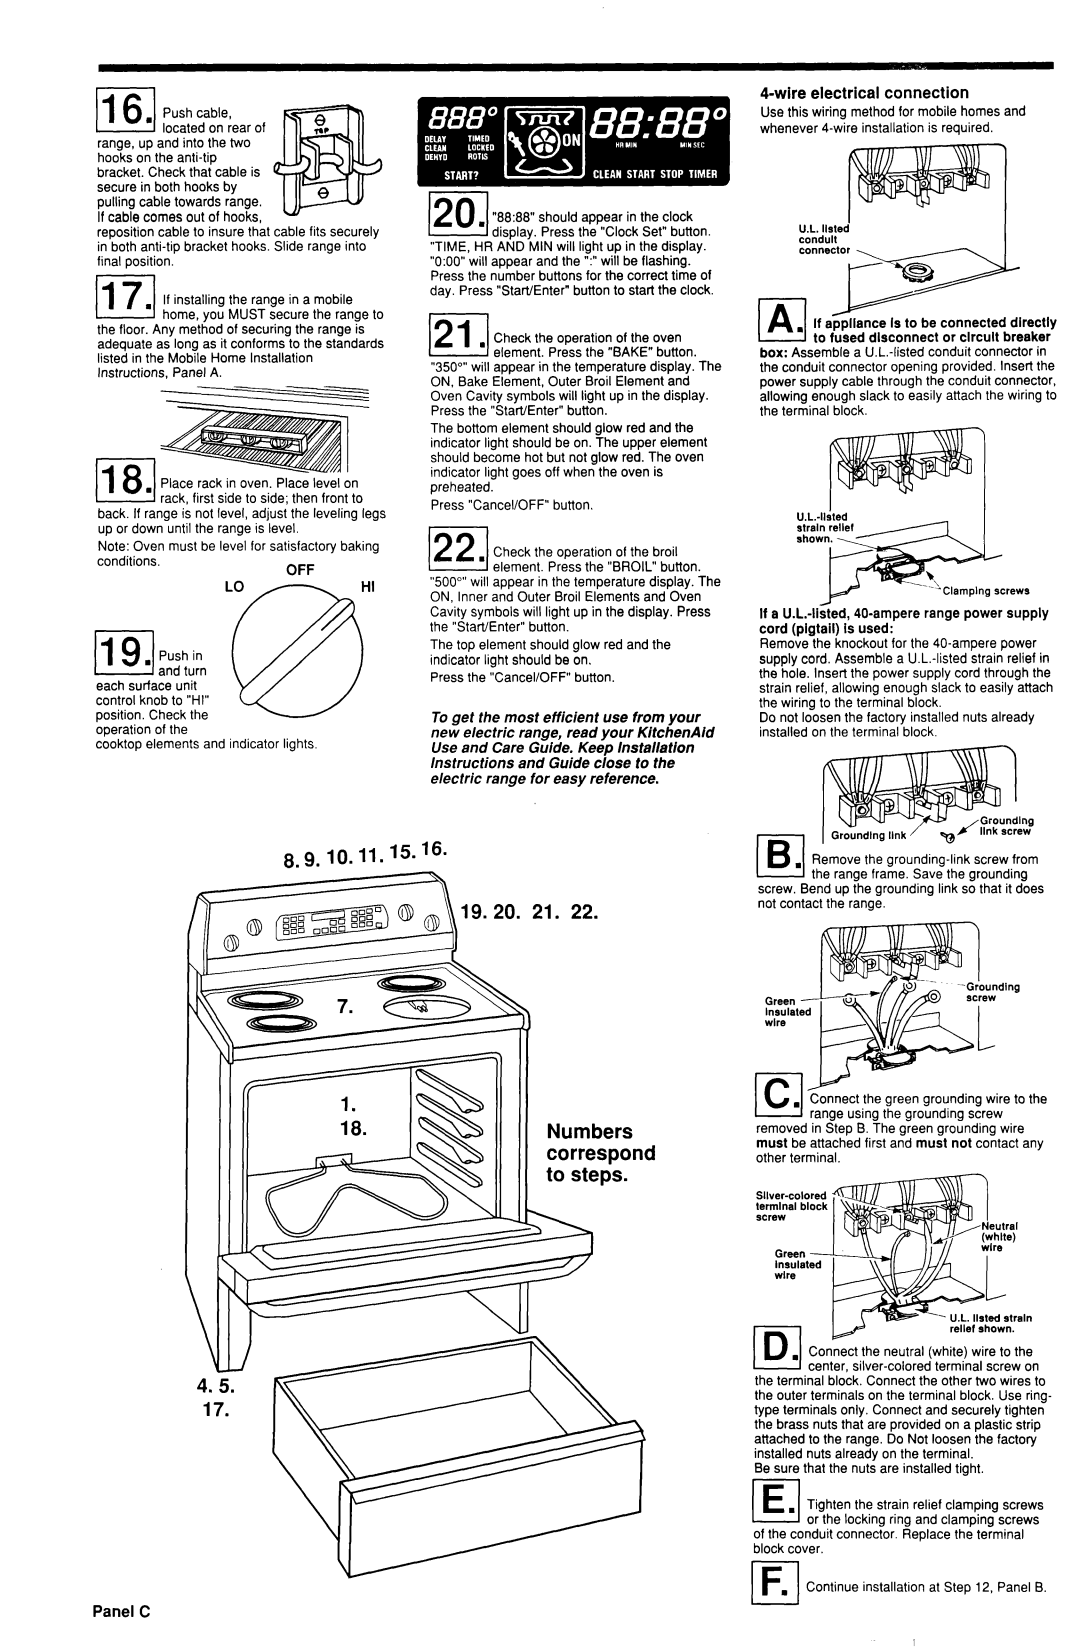 KitchenAid 9750520 REV A LO n, wire electrical connection, Panel C, l-z-l, 8.9. IO. 11.15. ‘6, Numbers, to steps 